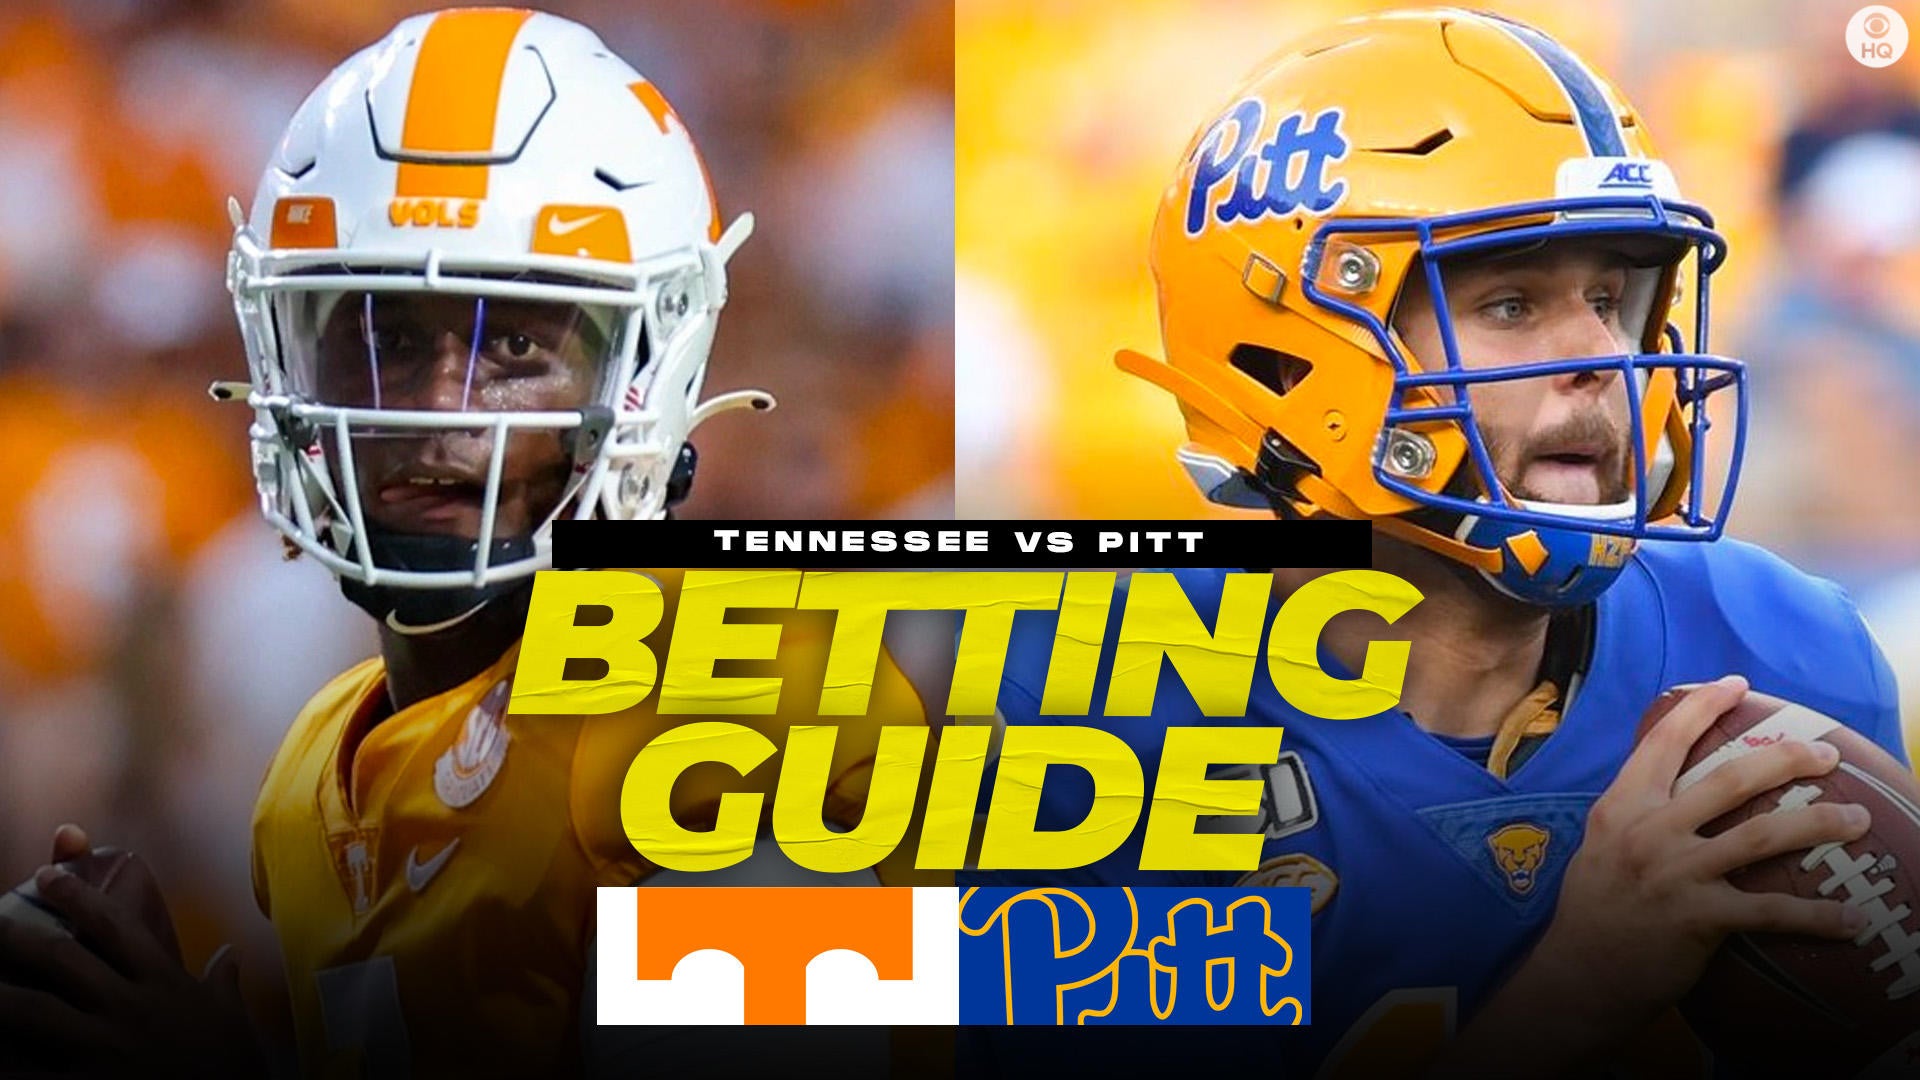 Pittsburgh vs. Tennessee Live Stream of NCAA Football